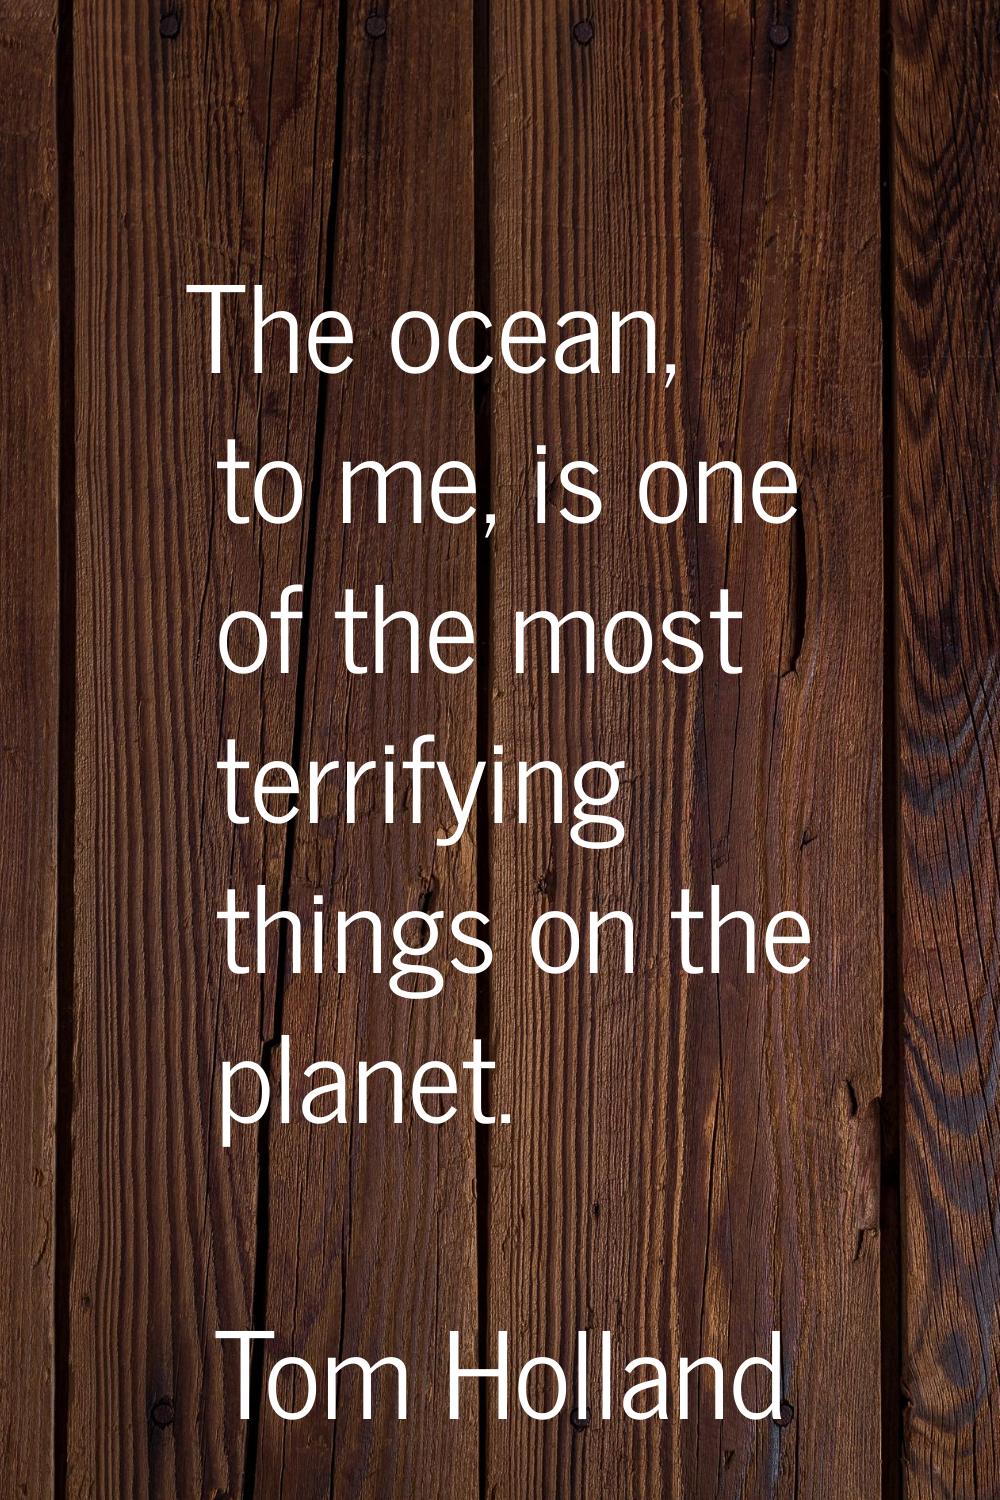 The ocean, to me, is one of the most terrifying things on the planet.